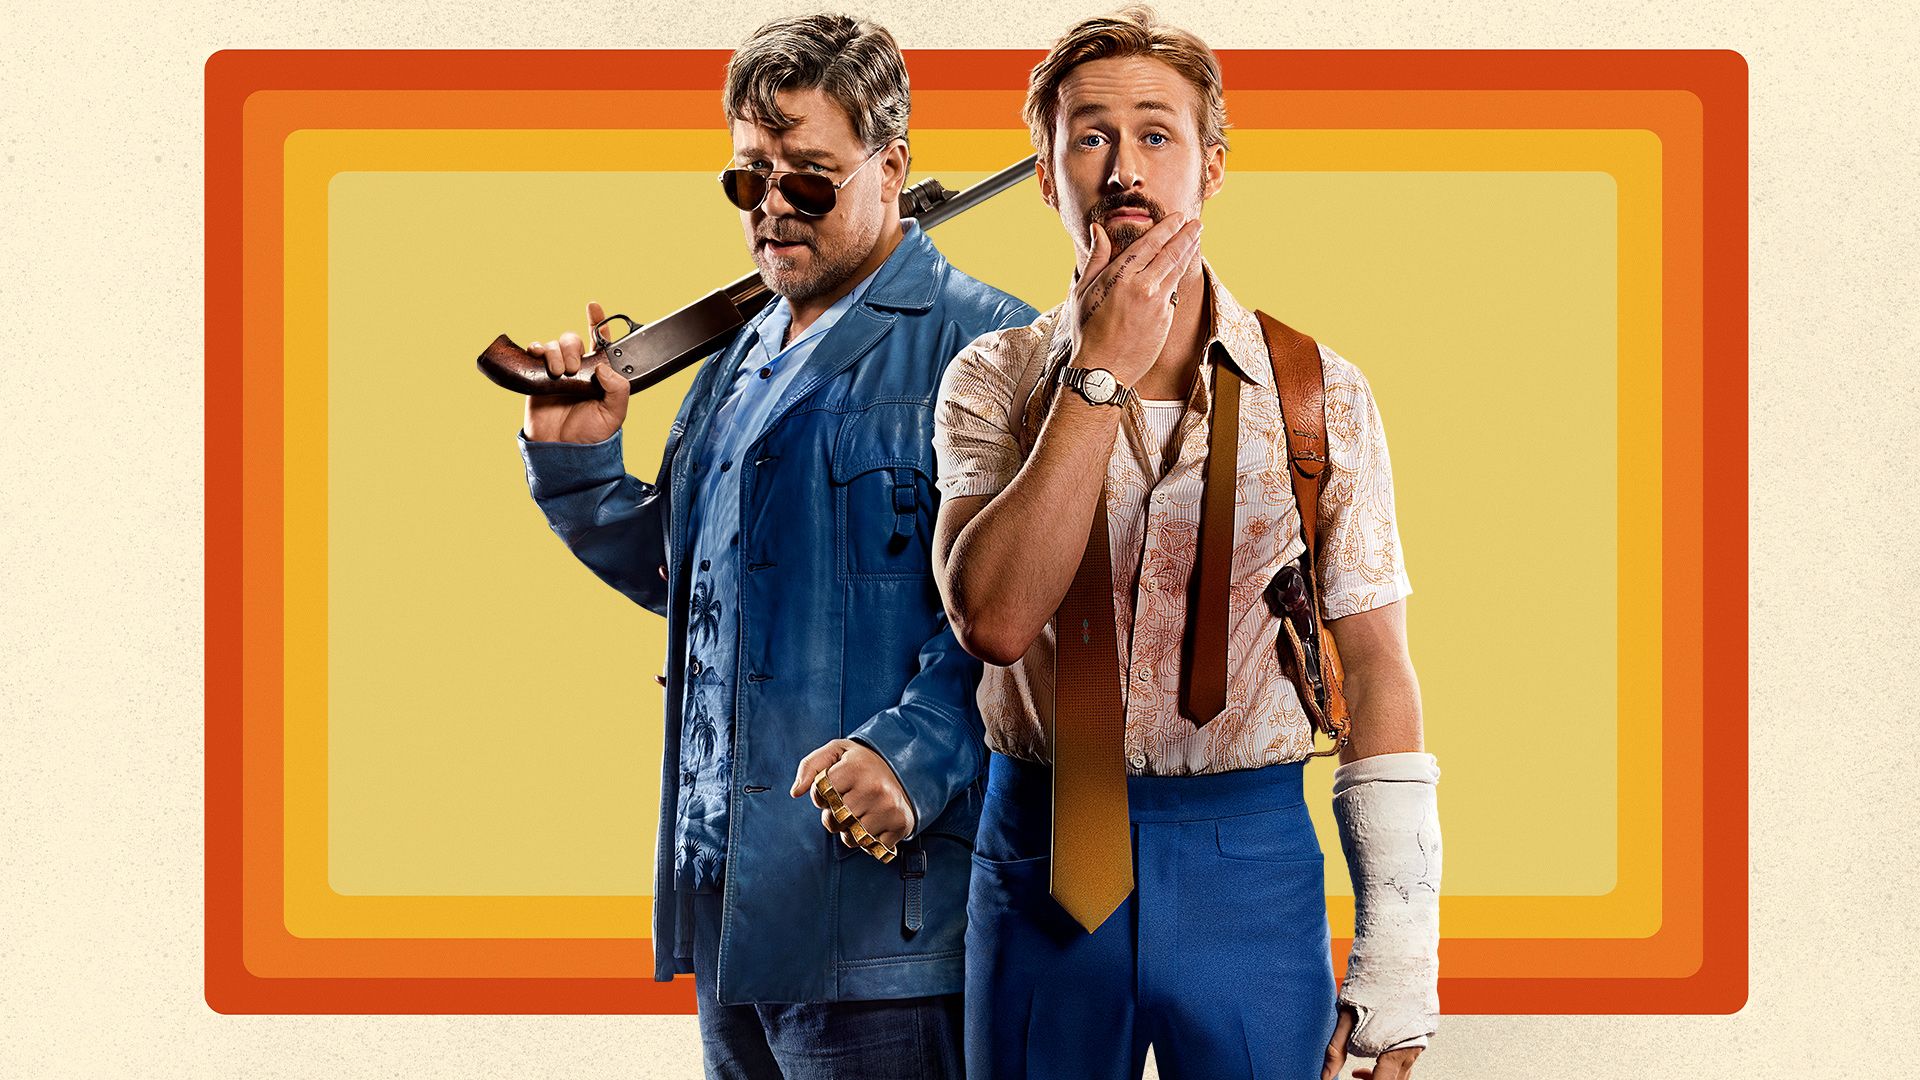 The Nice Guys background